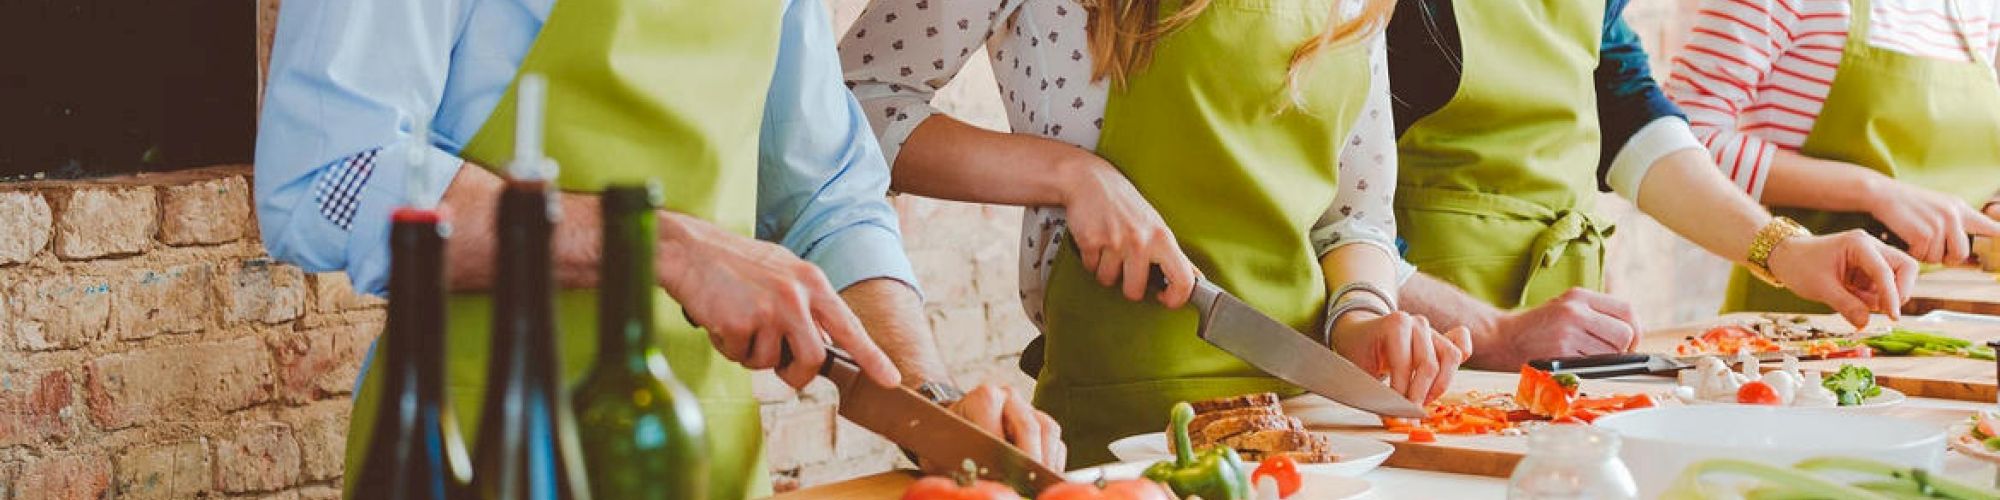 People in aprons are cooking together, chopping vegetables on a table.